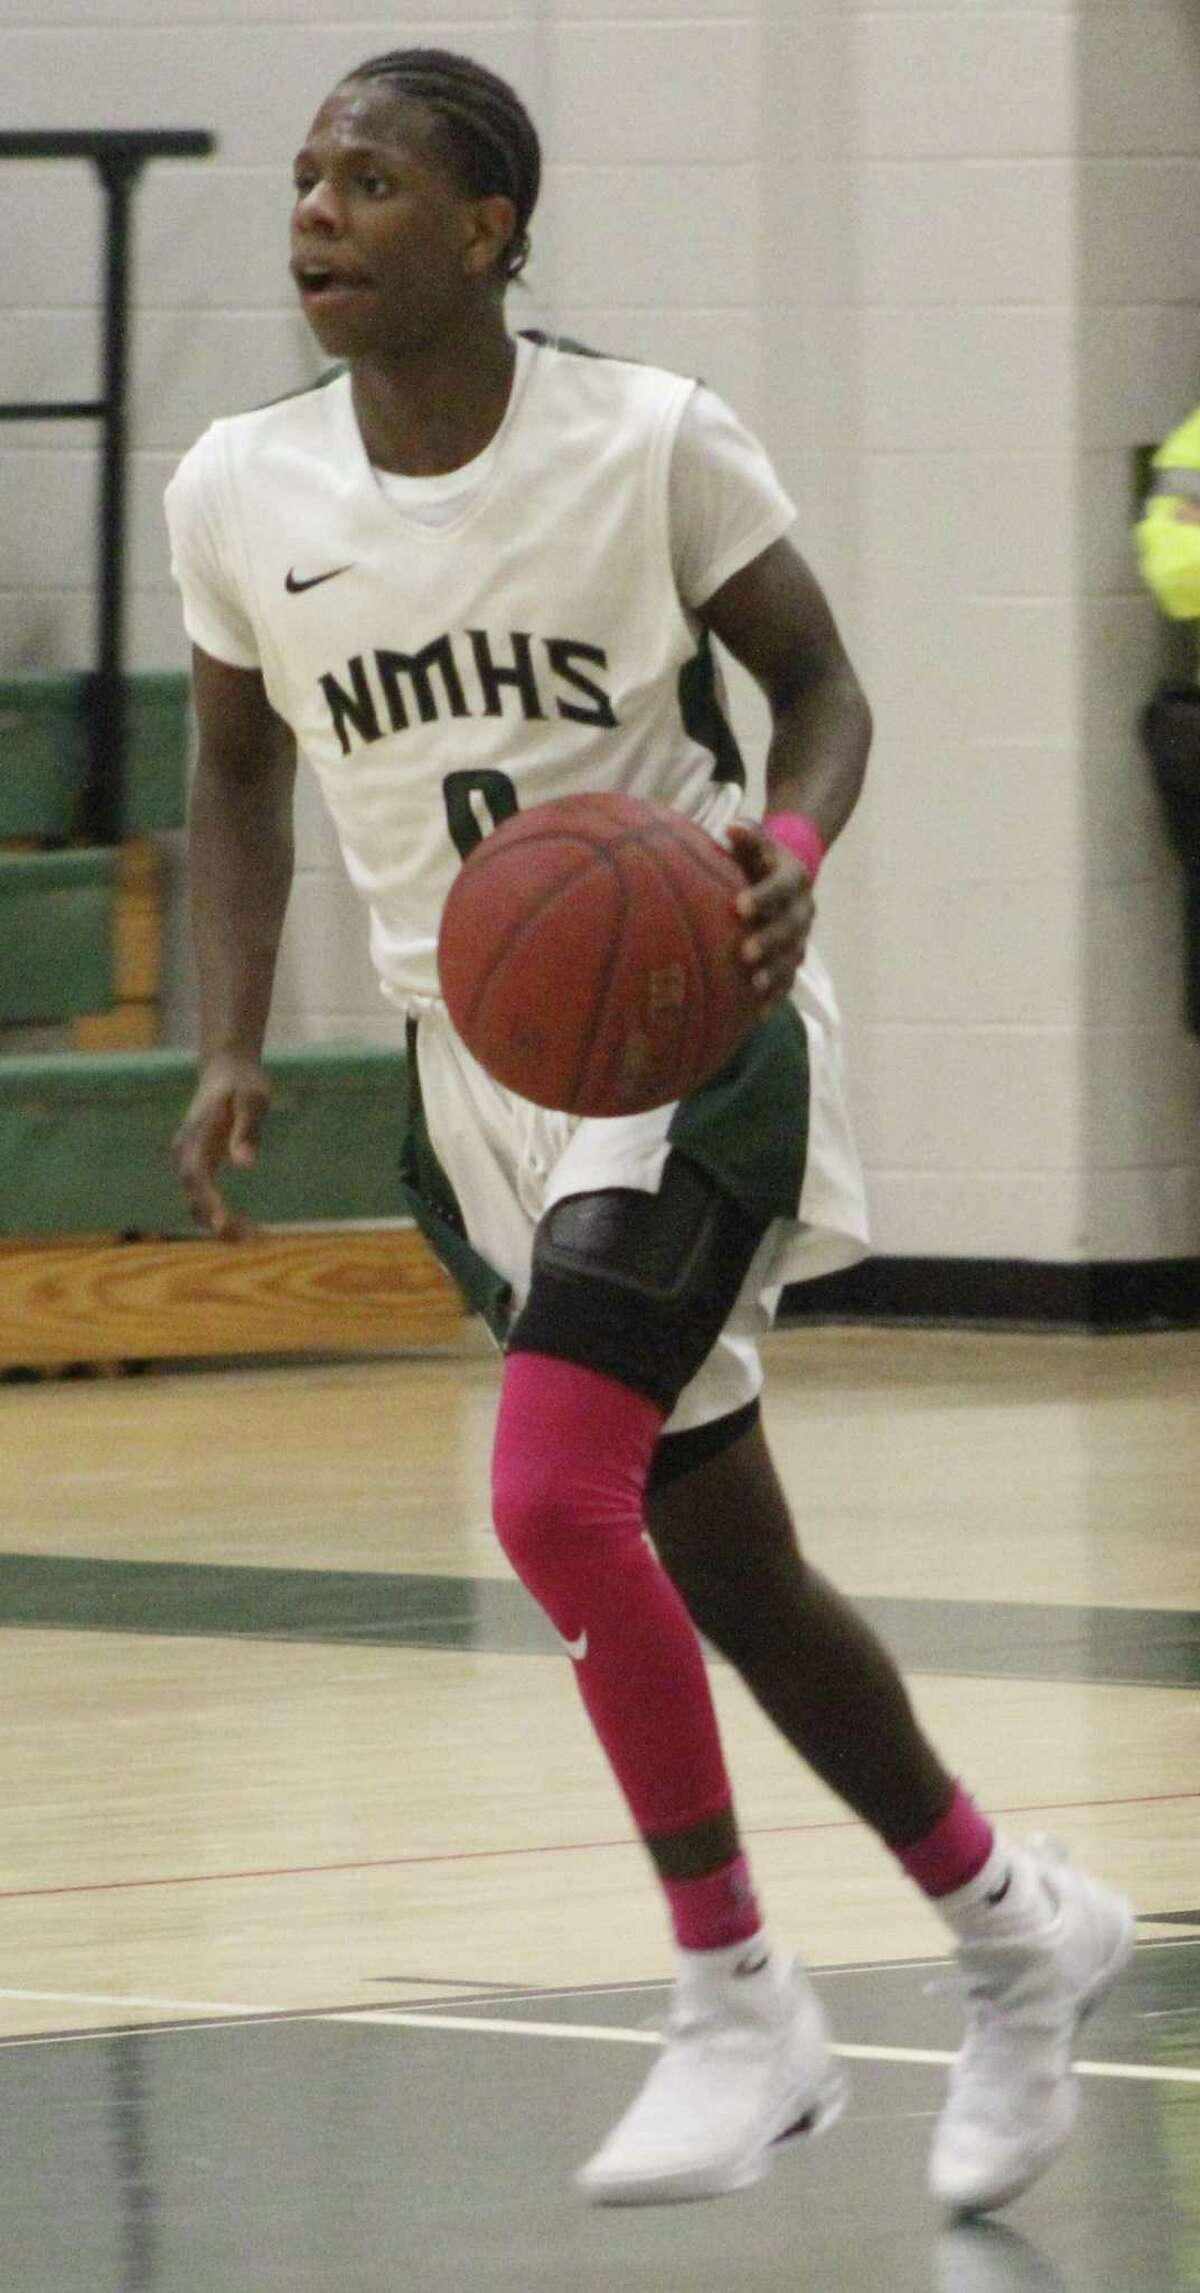 New Milford's Malik Proctor dribbles the ball up the court during the boys basketball game against Weston at new Milford High School Jan. 19, 2018.